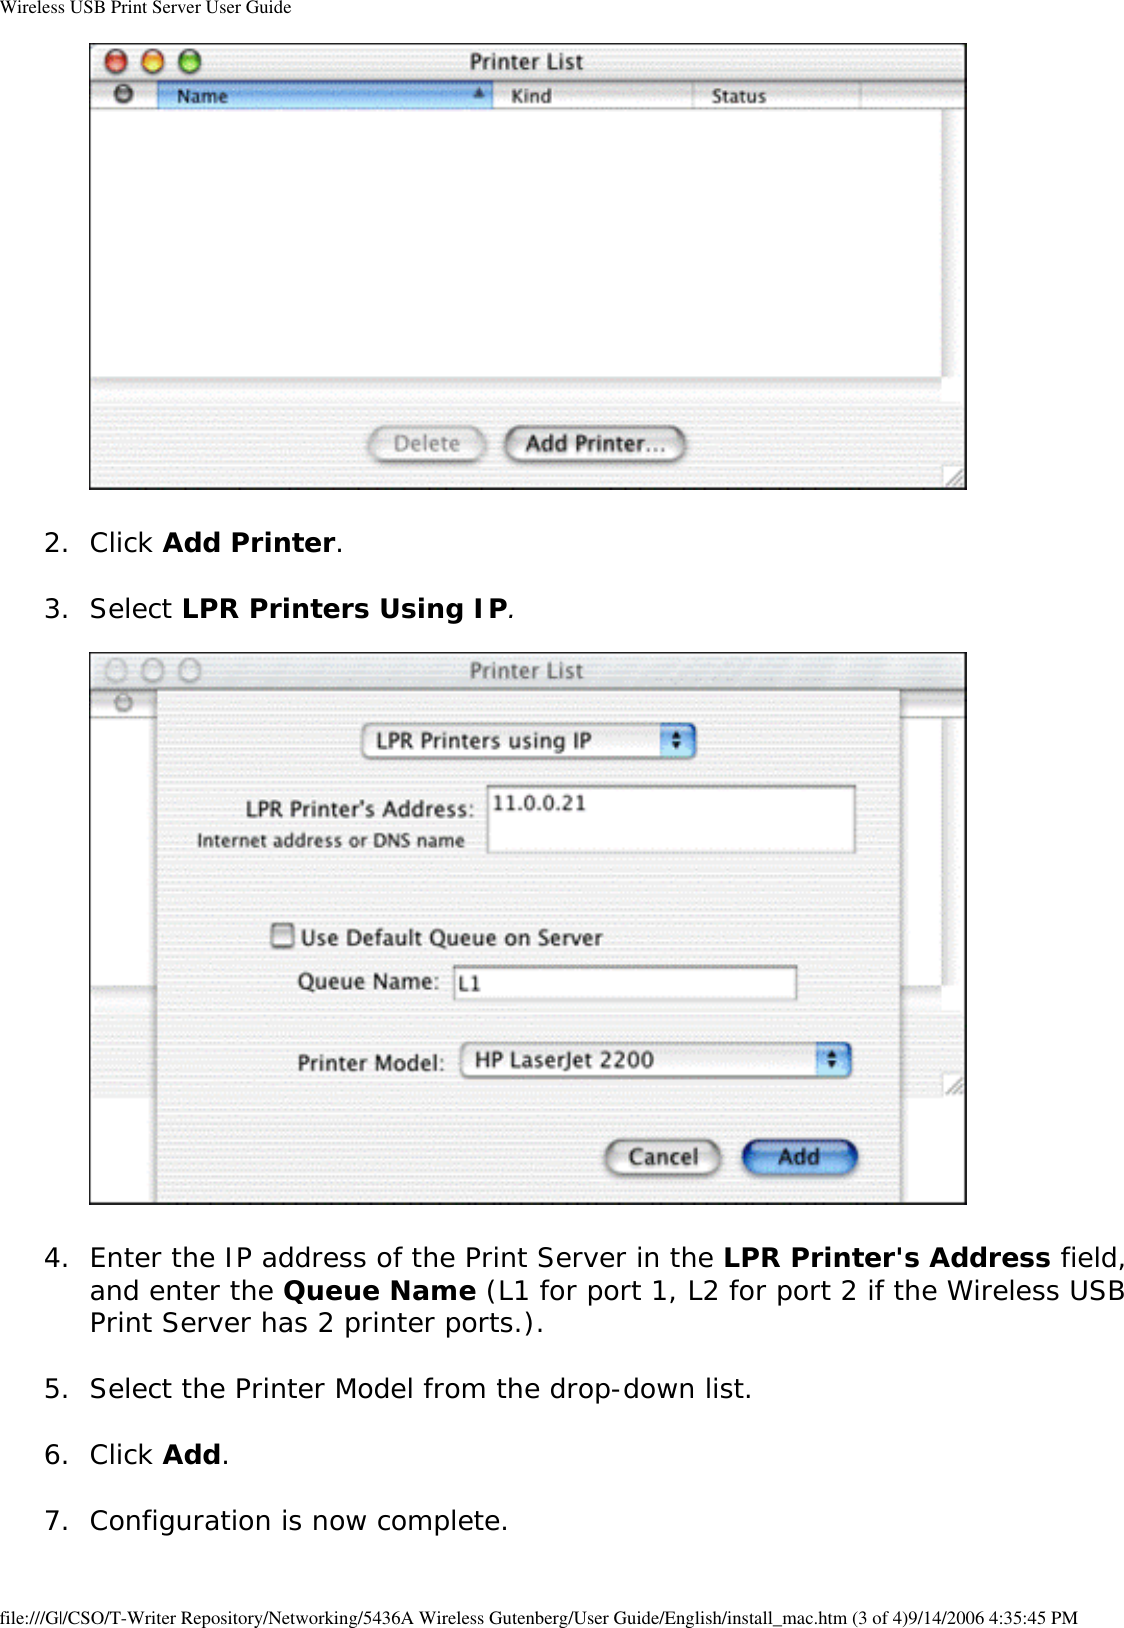 Wireless USB Print Server User Guide 2.  Click Add Printer. 3.  Select LPR Printers Using IP.    4.  Enter the IP address of the Print Server in the LPR Printer&apos;s Address field, and enter the Queue Name (L1 for port 1, L2 for port 2 if the Wireless USB Print Server has 2 printer ports.). 5.  Select the Printer Model from the drop-down list. 6.  Click Add. 7.  Configuration is now complete. file:///G|/CSO/T-Writer Repository/Networking/5436A Wireless Gutenberg/User Guide/English/install_mac.htm (3 of 4)9/14/2006 4:35:45 PM